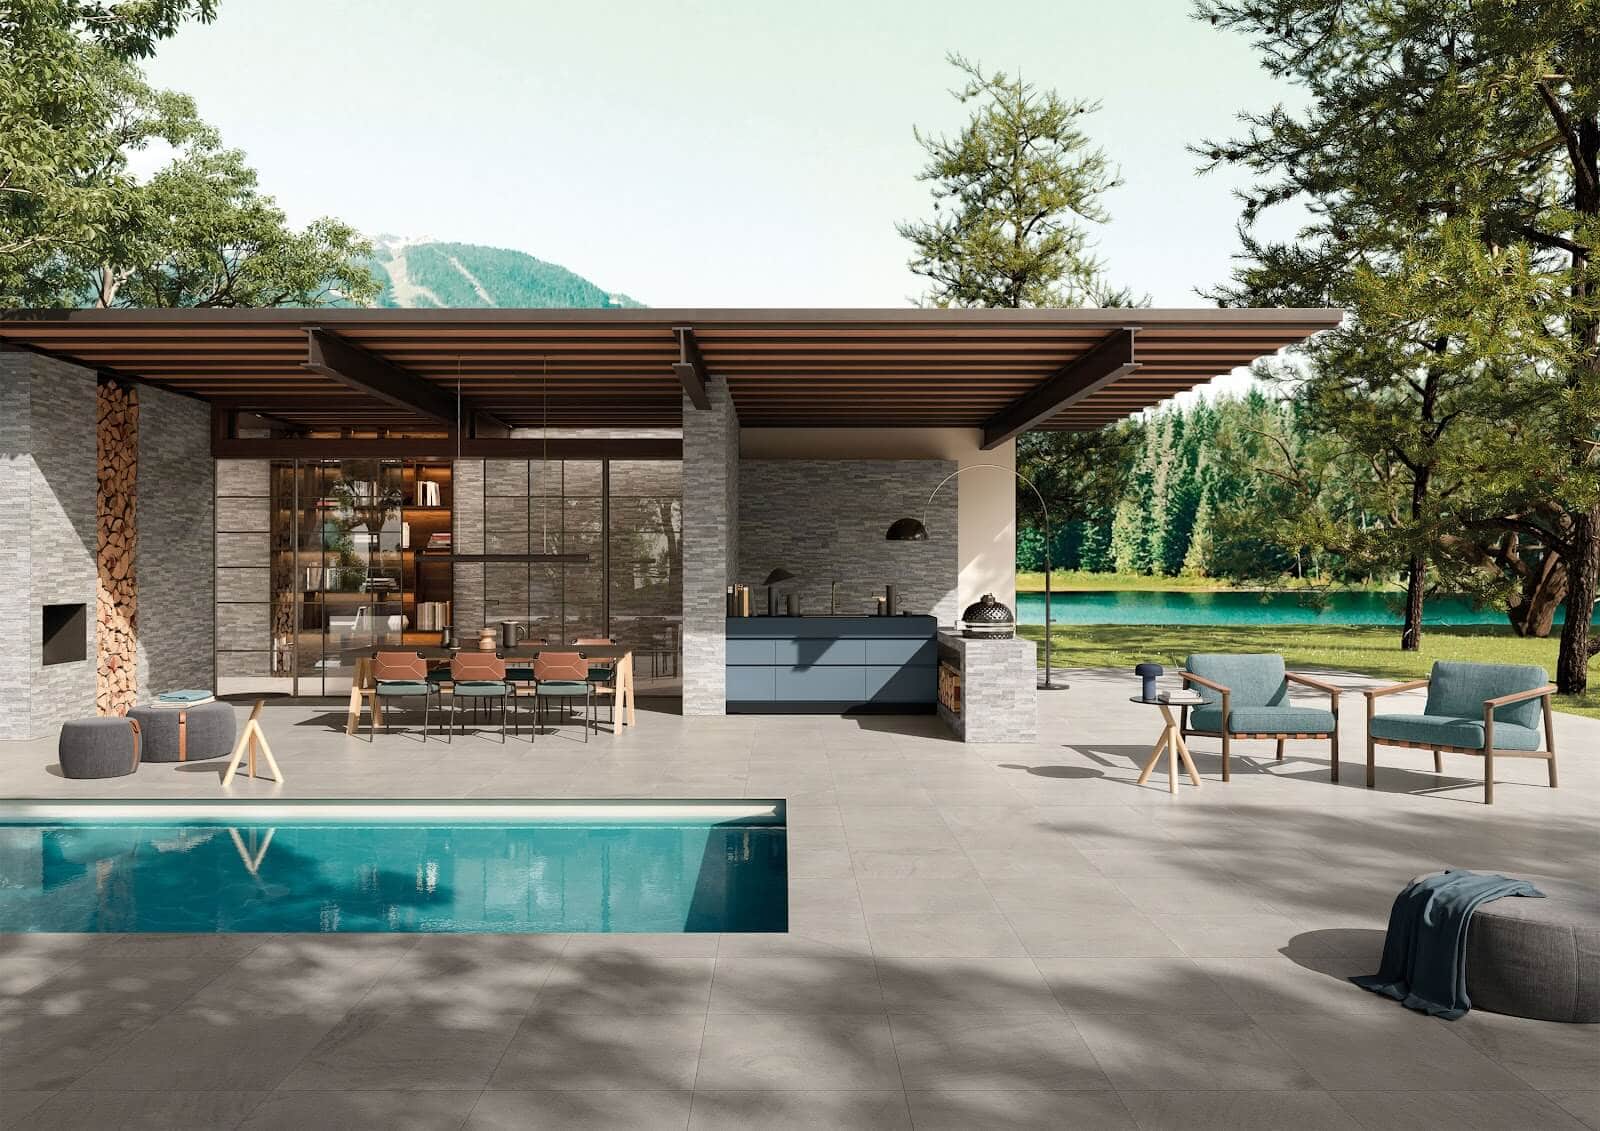 Outdoor kitchen with concrete-look tile flooring and pool surround